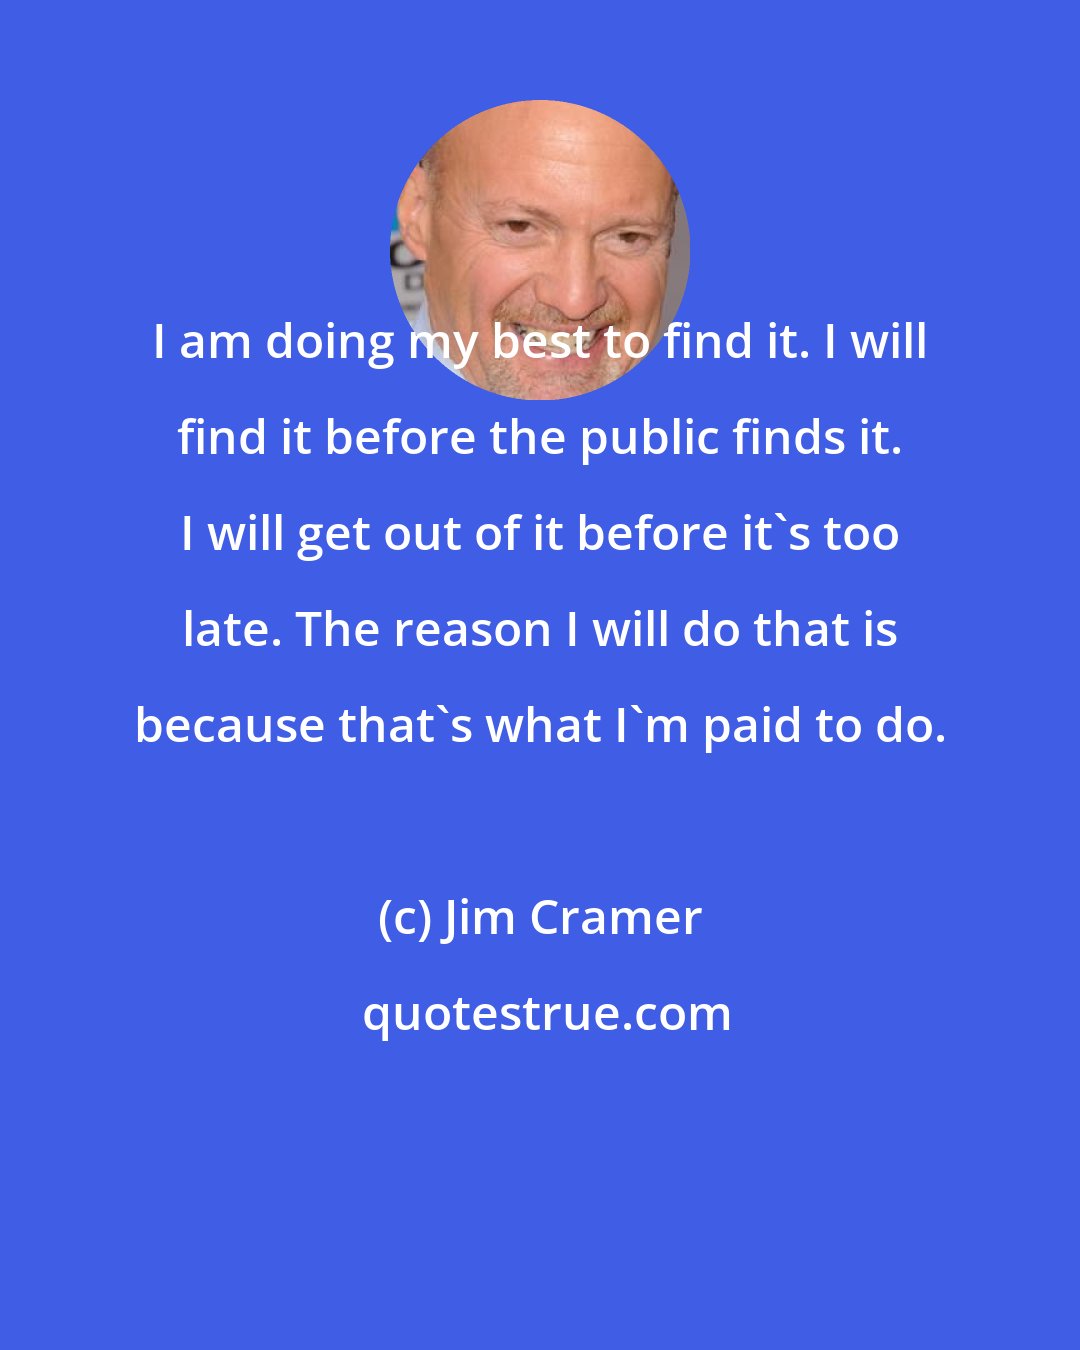 Jim Cramer: I am doing my best to find it. I will find it before the public finds it. I will get out of it before it's too late. The reason I will do that is because that's what I'm paid to do.